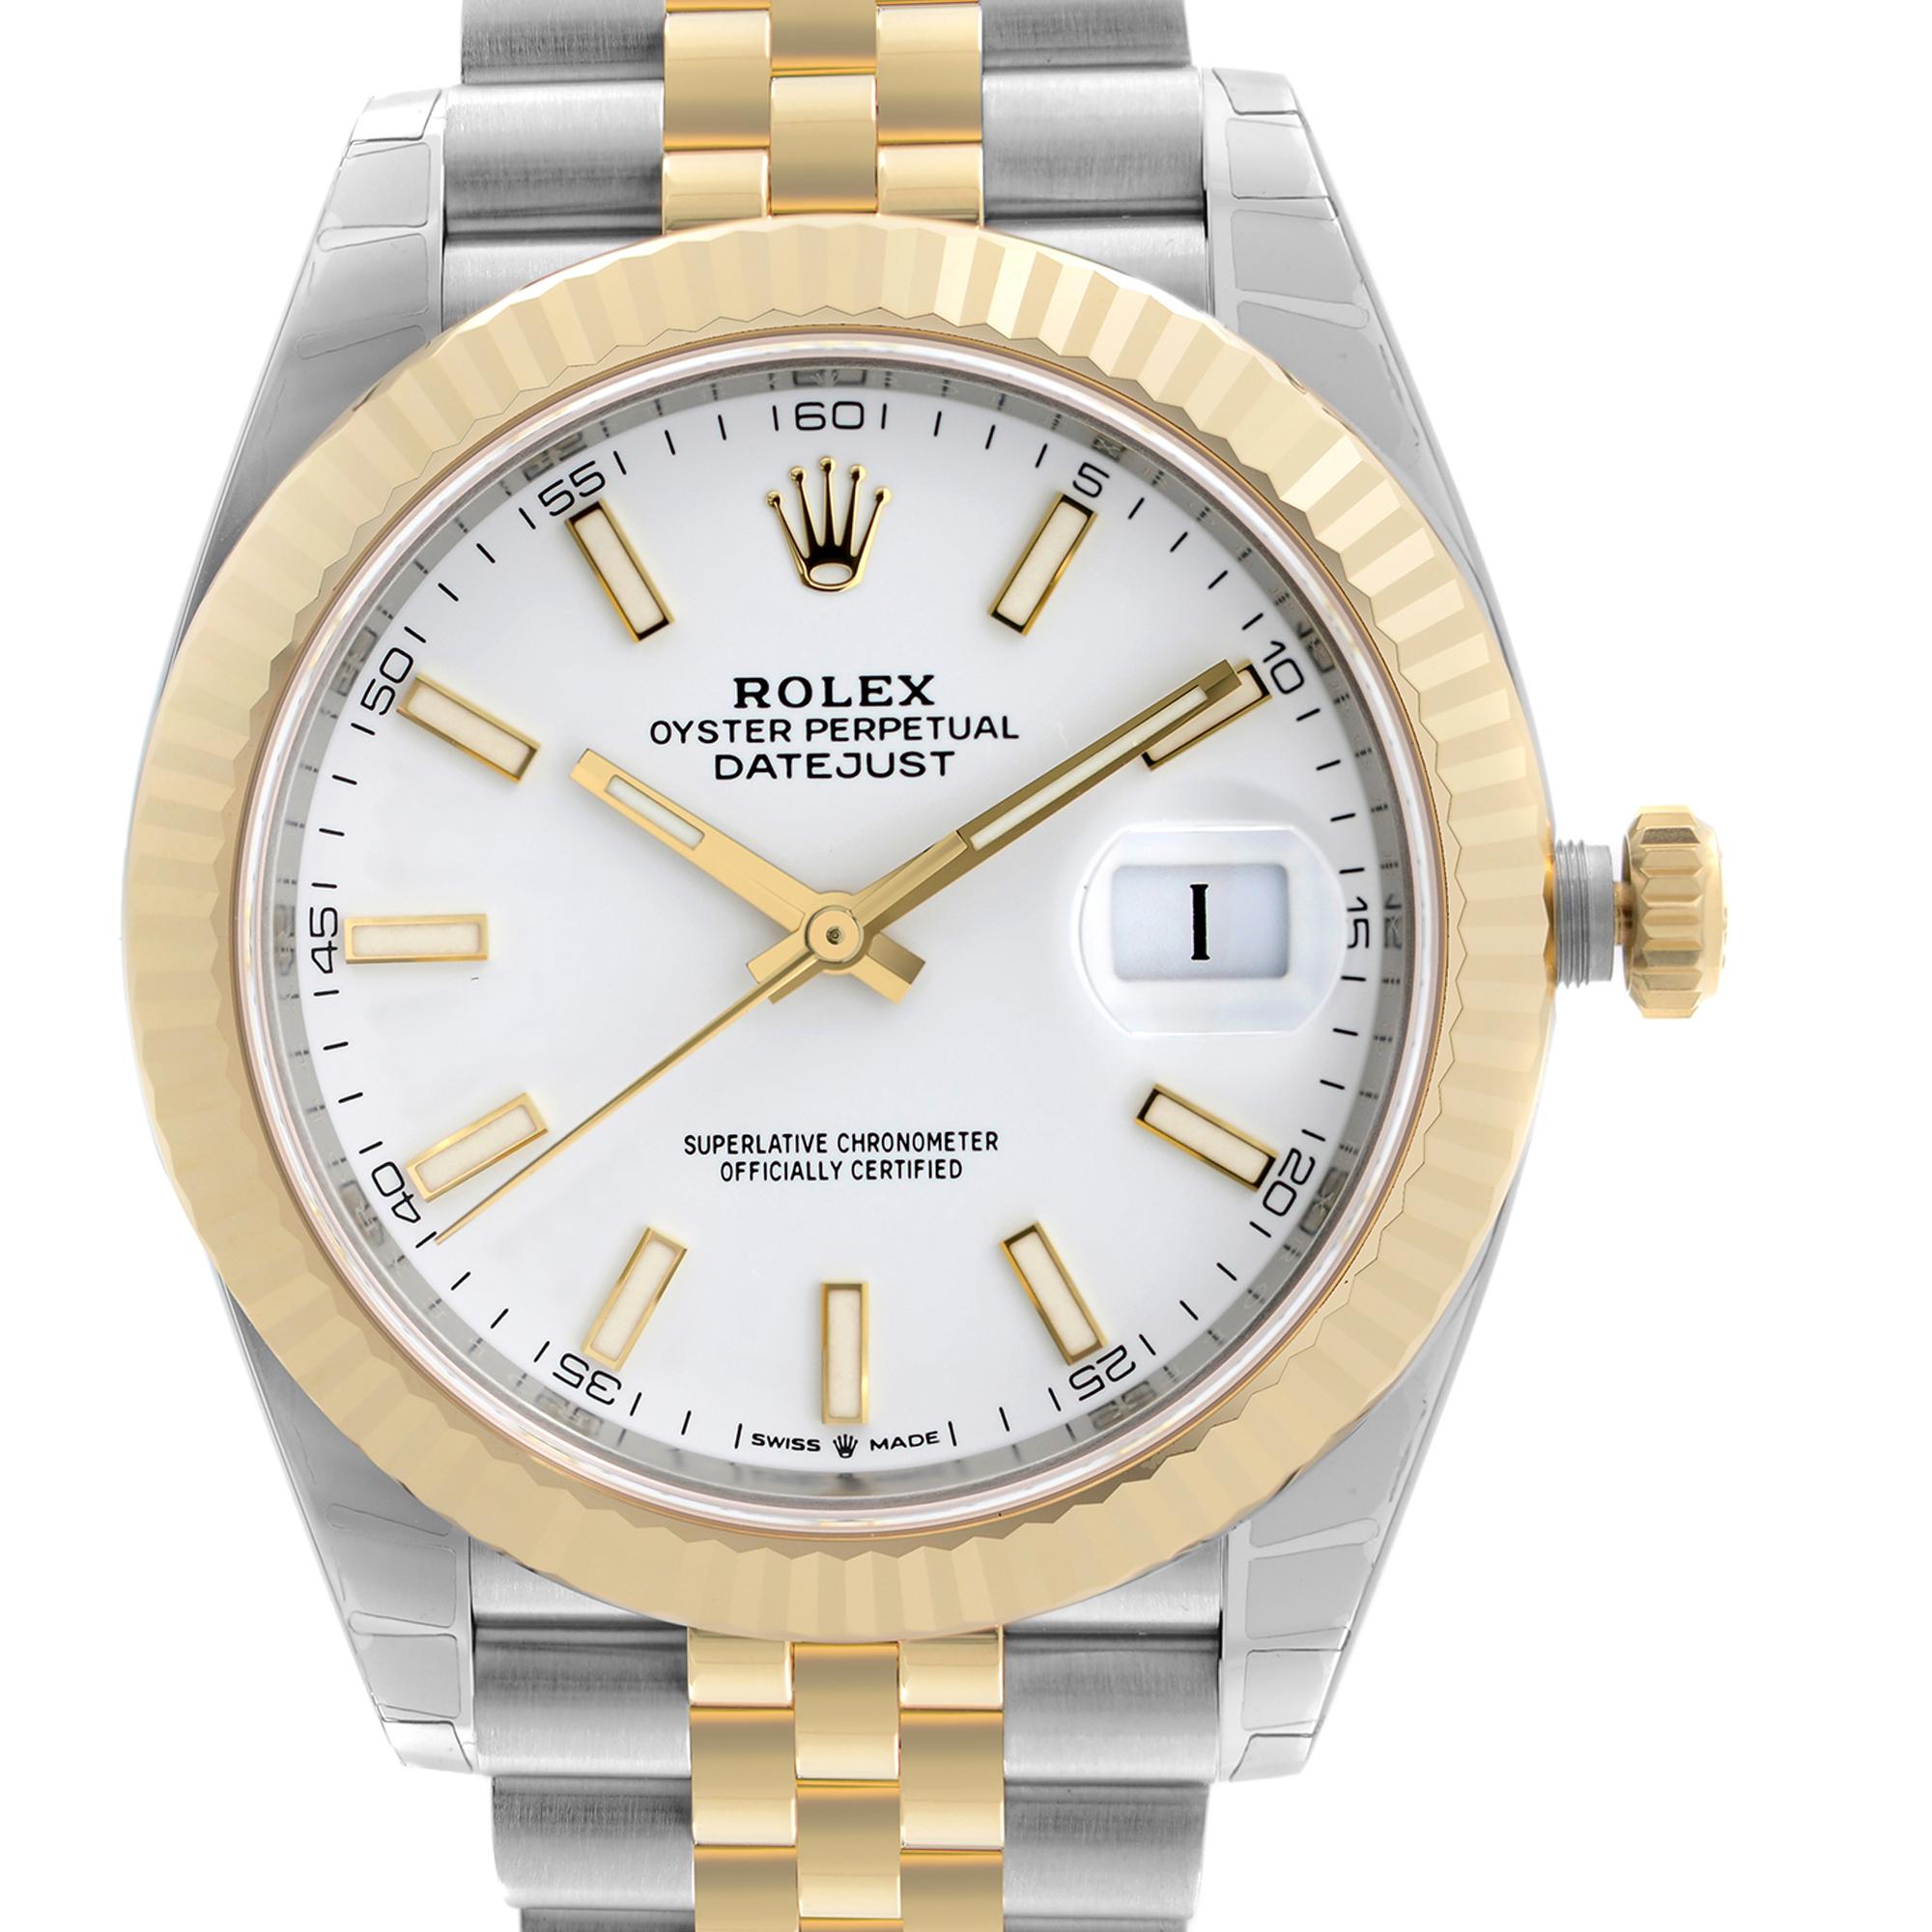 Brand New Rolex Datejust 41mm Yellow Gold Stainless Steel White Dial Men's Automatic Watch 126333. The Watch comes with a 2021 card. This Timepiece is powered by an Automatic Movement and Features: Polished Steel Round Case and Stainless Steel and